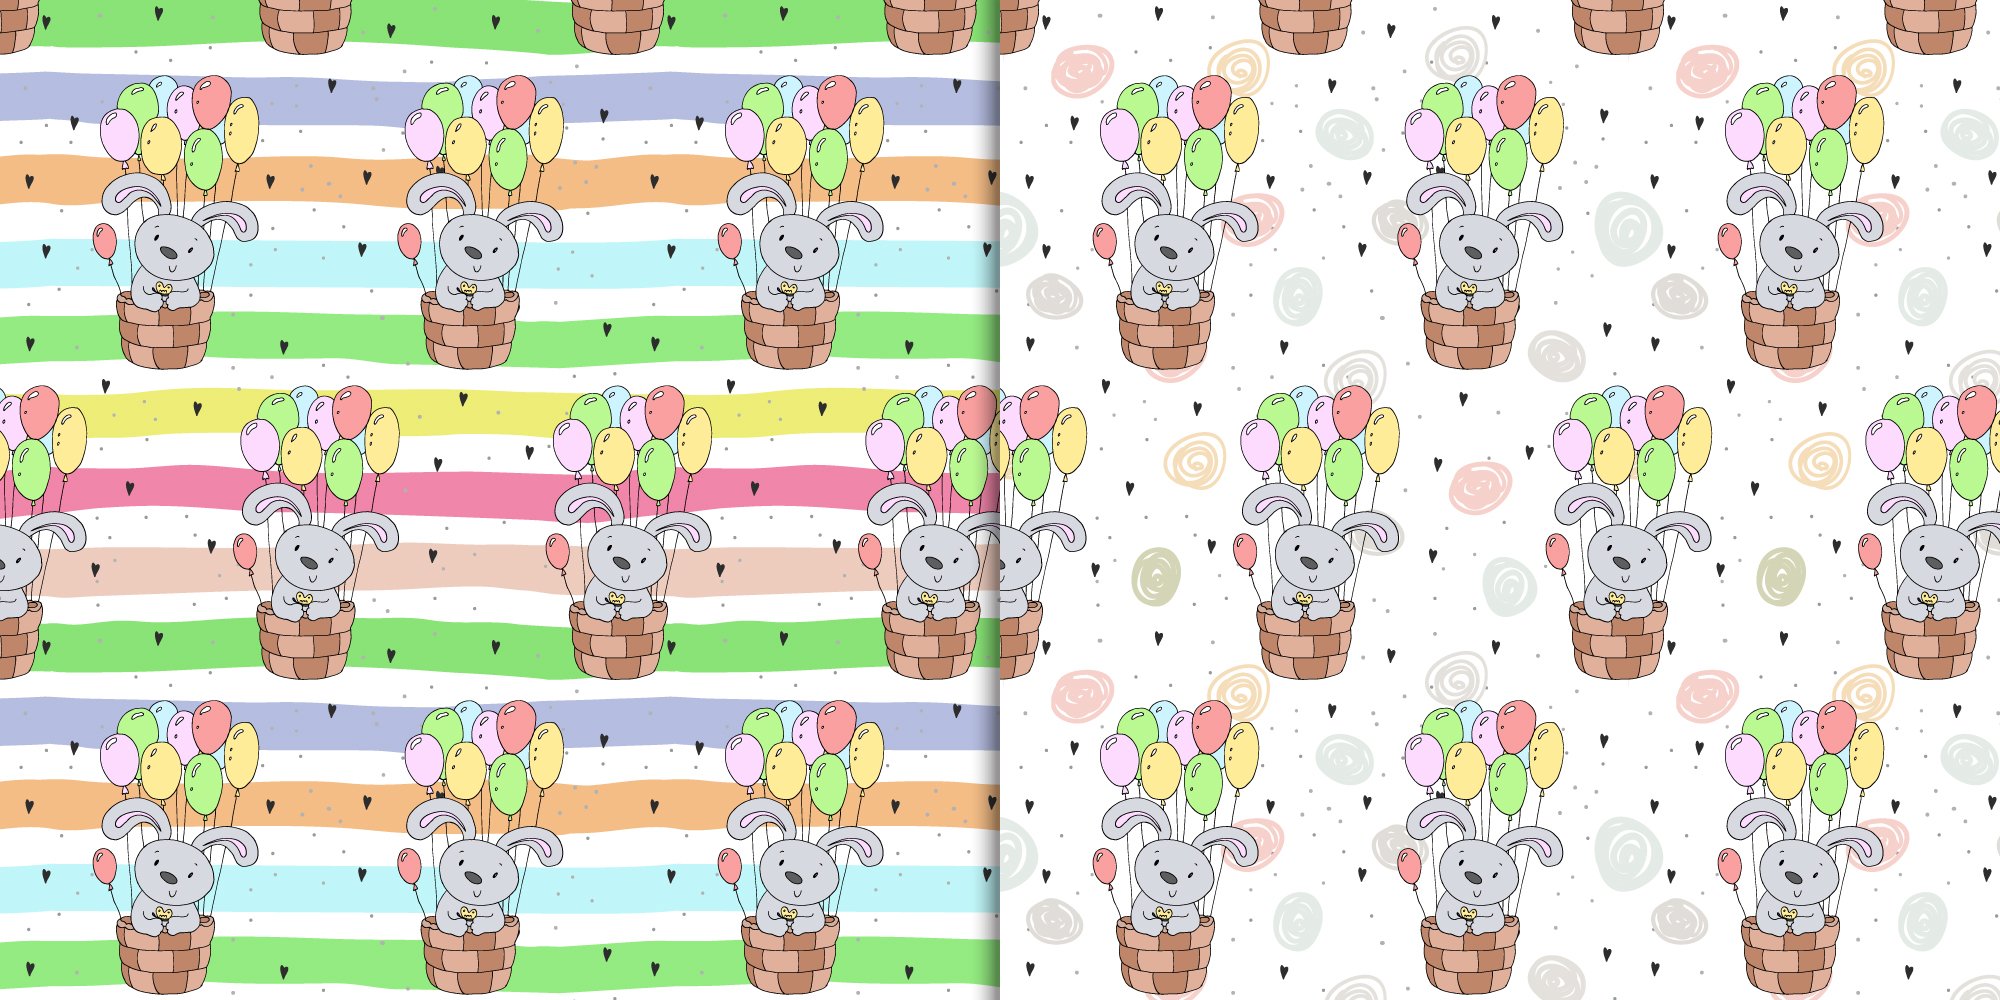 Cute rabbits patterns colection!.